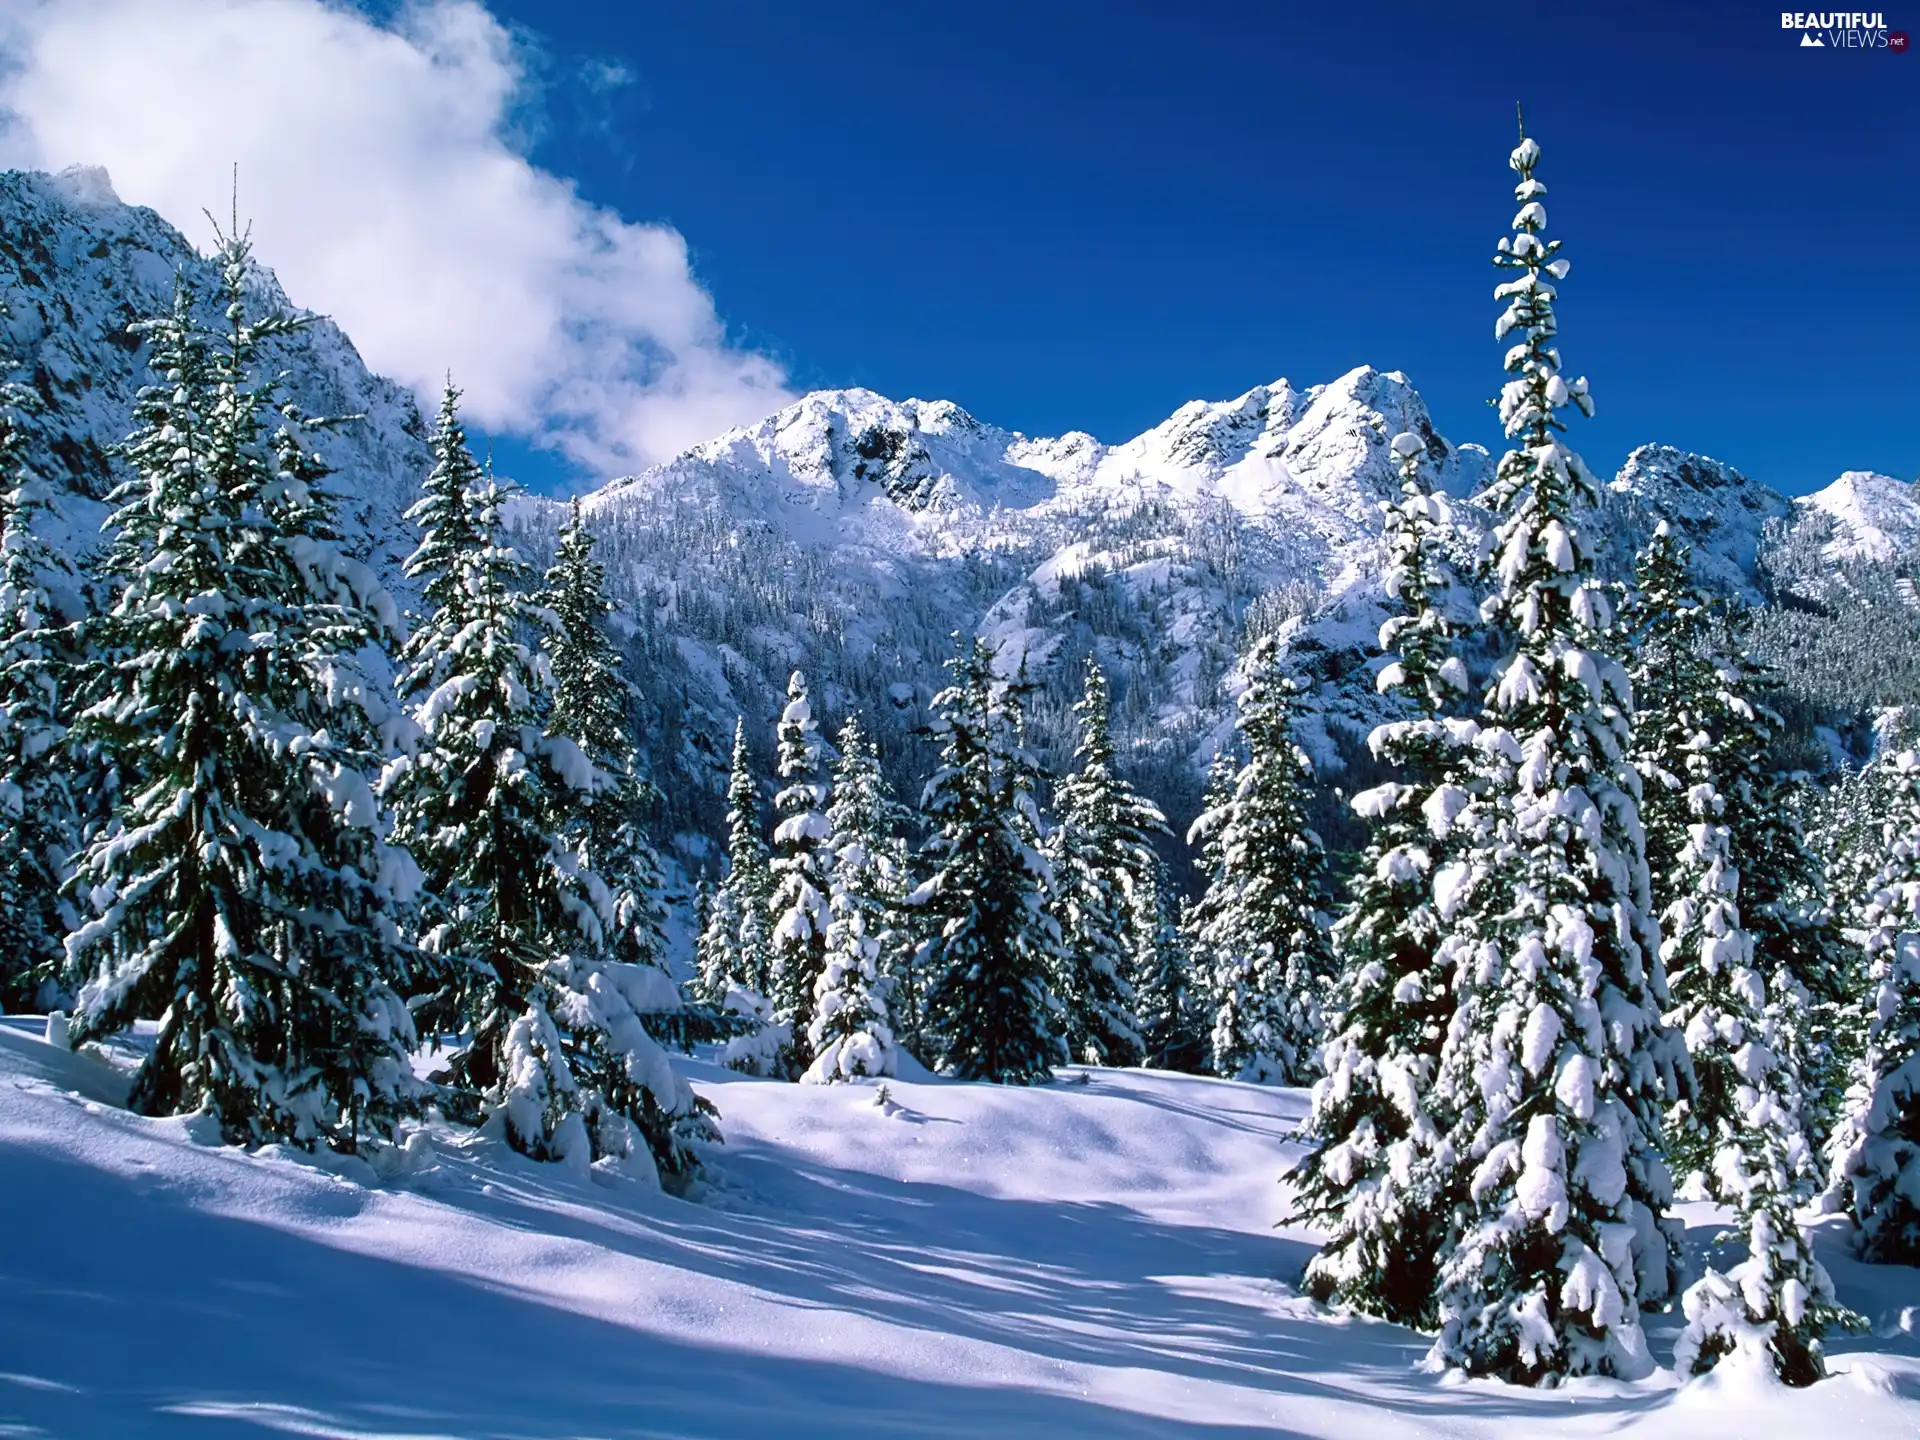 Mountains, snow, trees, viewes, snowy